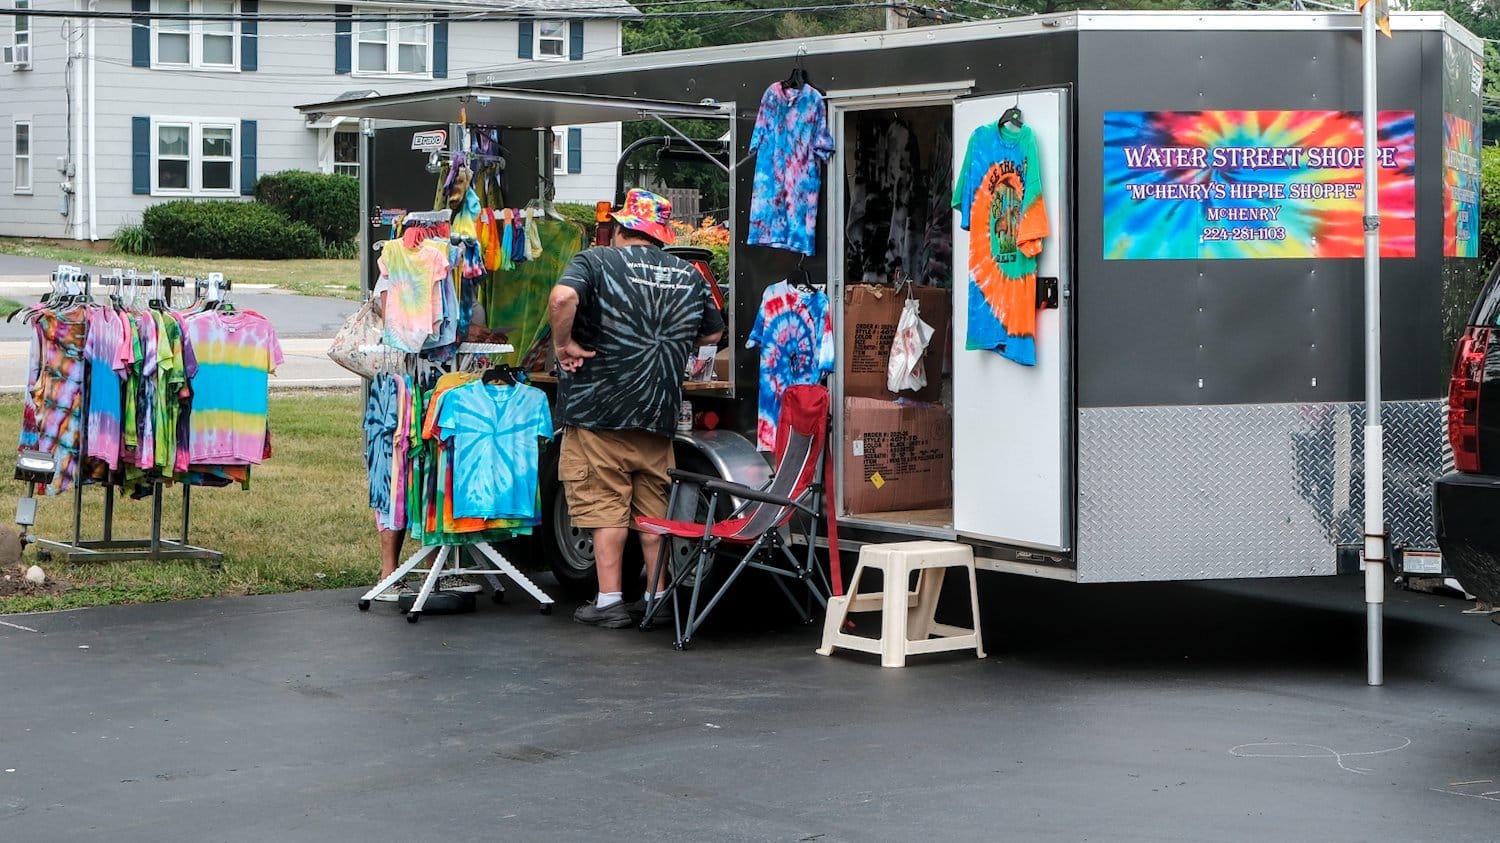 Water Street Shoppe setup selling tie-dyed goods.